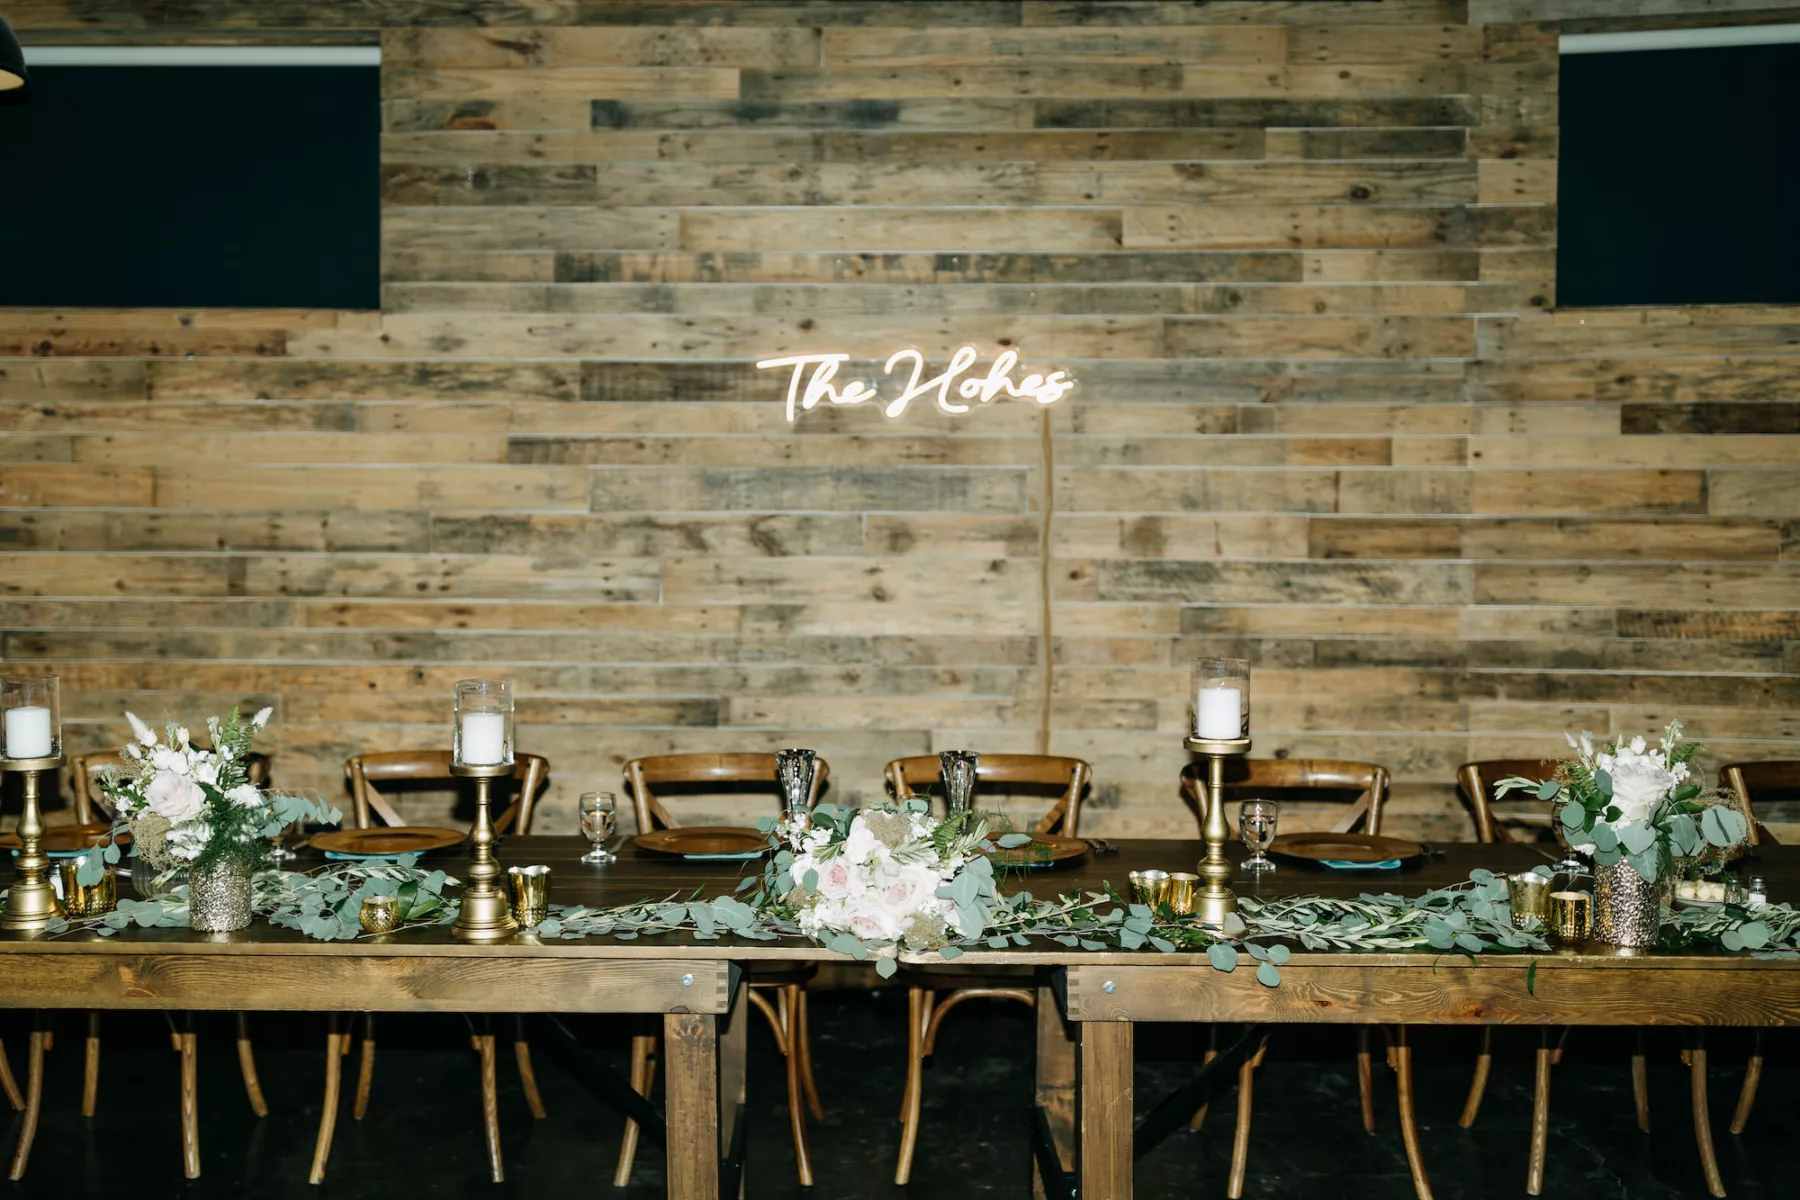 Rustic Fall Beach Wedding Reception Head Table Decor Inspiration | White Roses and Greenery Garland | White Neon Sign Ideas | Tampa Bay Event Venue The West Events